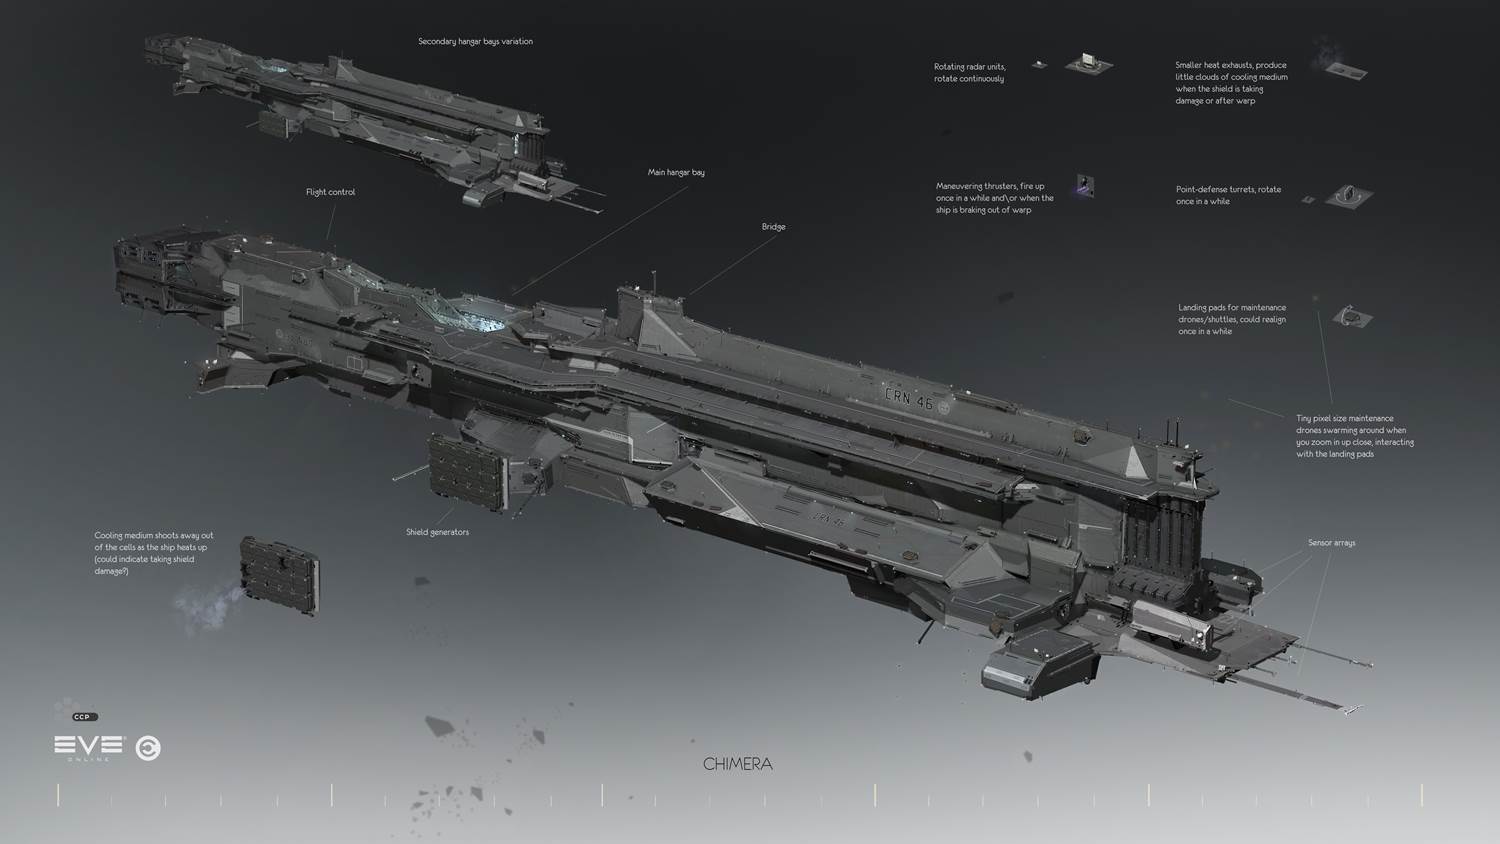 citadel hype. we get this new chimera model too with it? : r/Eve